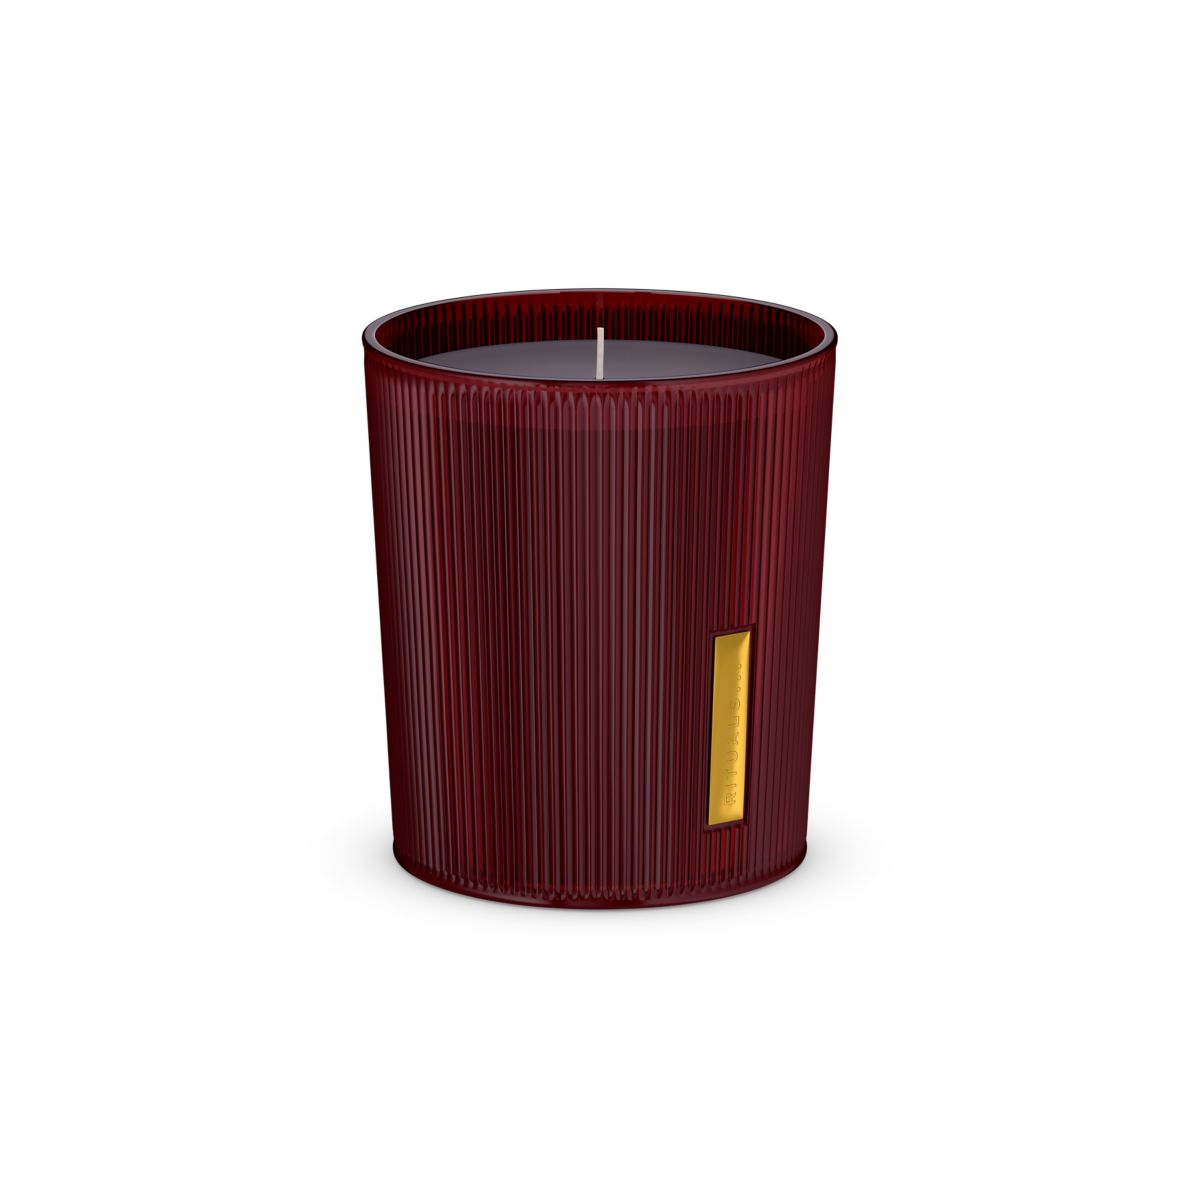 Rituals Ayurveda Scented Candle - The Ritual of Ayurveda Scented Candle